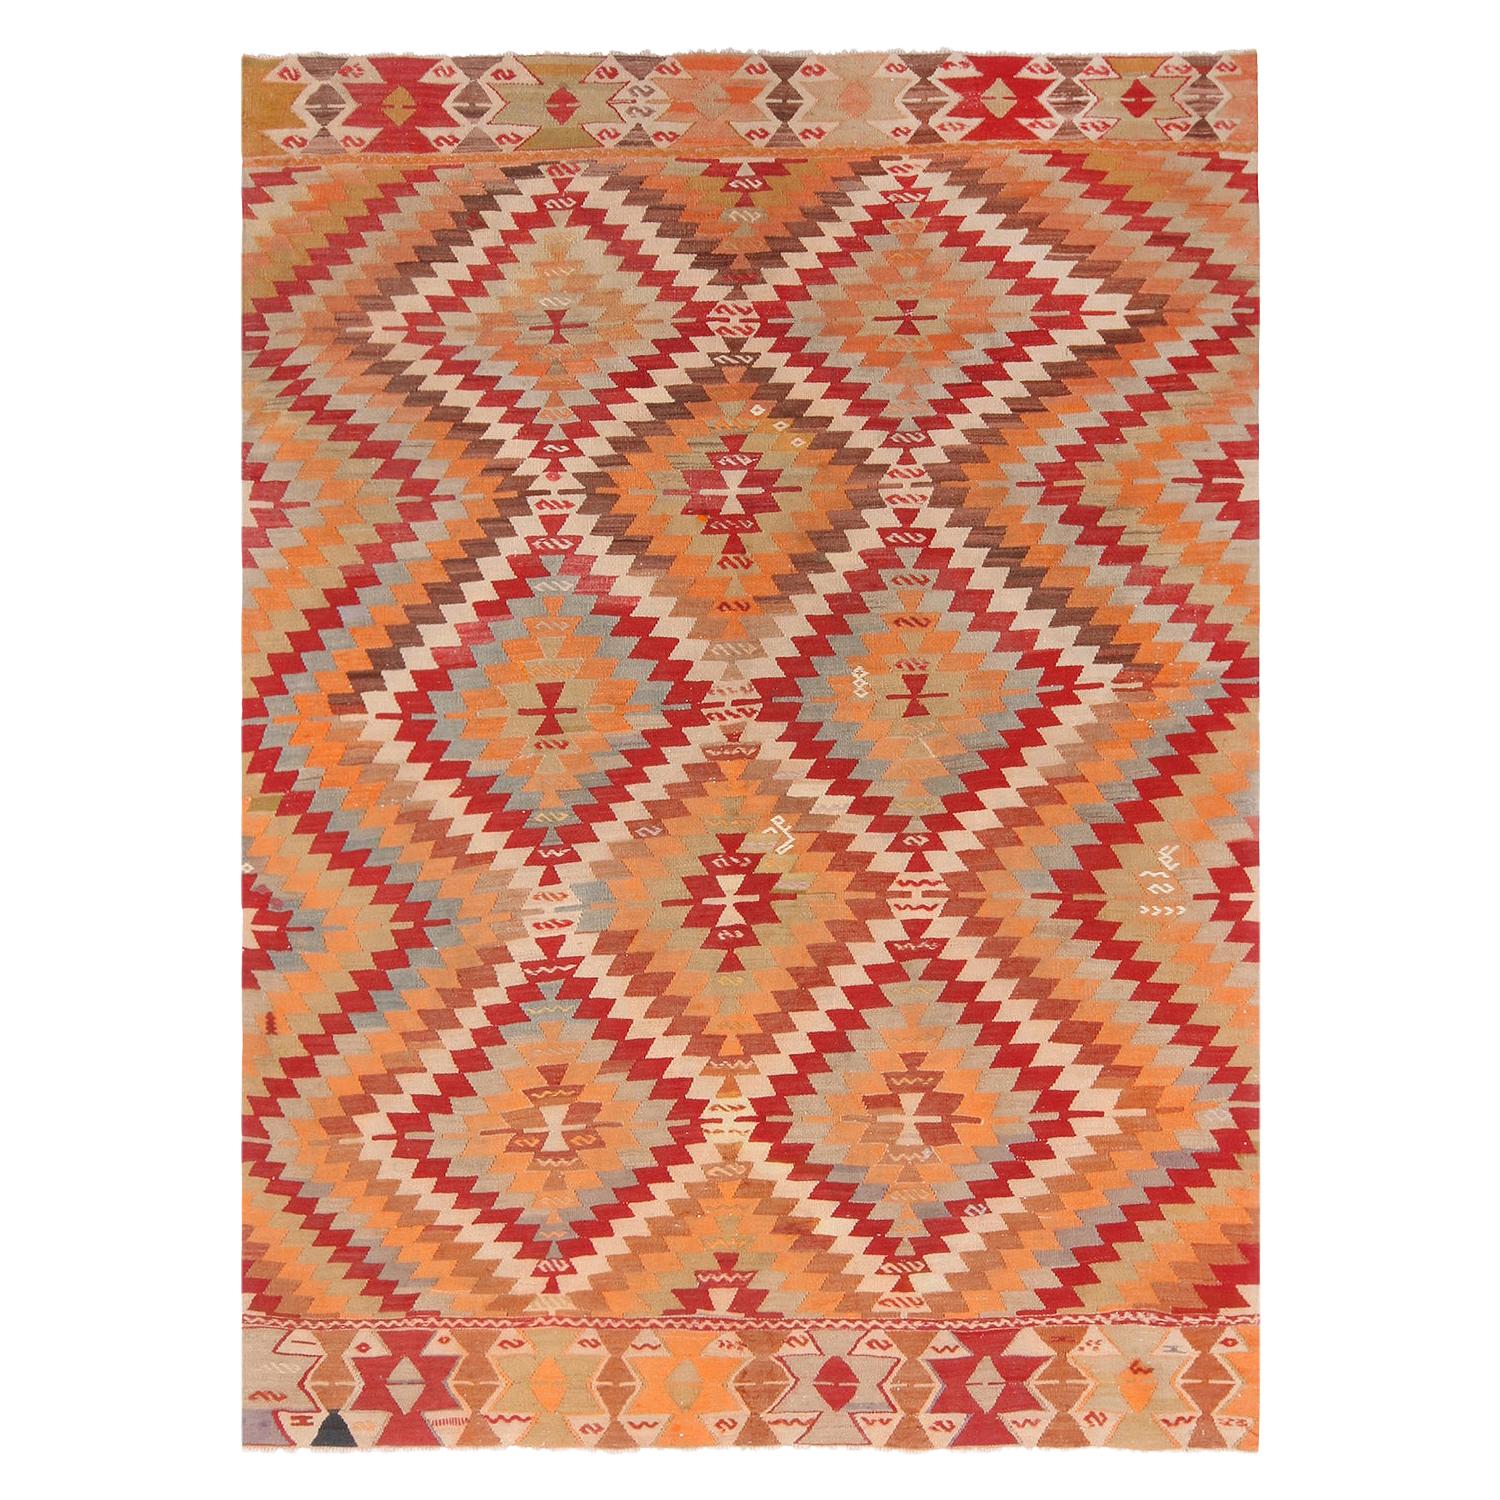 Vintage Mid-Century Diamond Golden Yellow and Red Wool Kilim Rug by Rug & Kilim